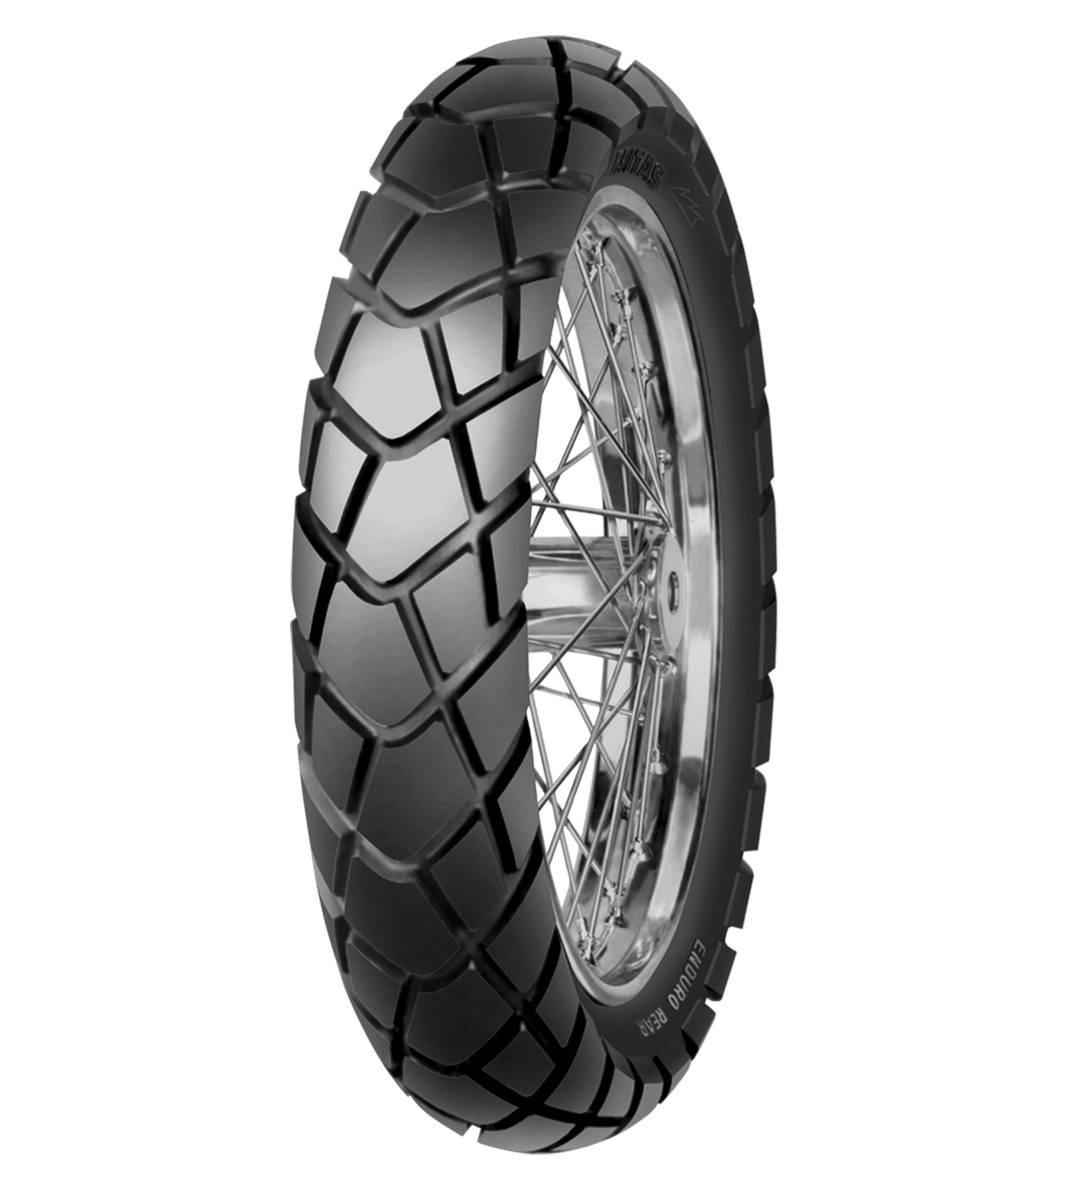 Mitas E-08 ENDURO 130/80-18 Trail ON Trail 72T No Stripe Tubeless Rear Tire, 224414, 130/80-18, Adventure Touring, E Series, E-08 Enduro, Rear, Trail, Trail ON, Tires - Imported and distributed in North & South America by Lindeco Genuine Powersports - Premier Powersports Equipment and Accessories for Motorcycle Enthusiasts, Professional Riders and Dealers.